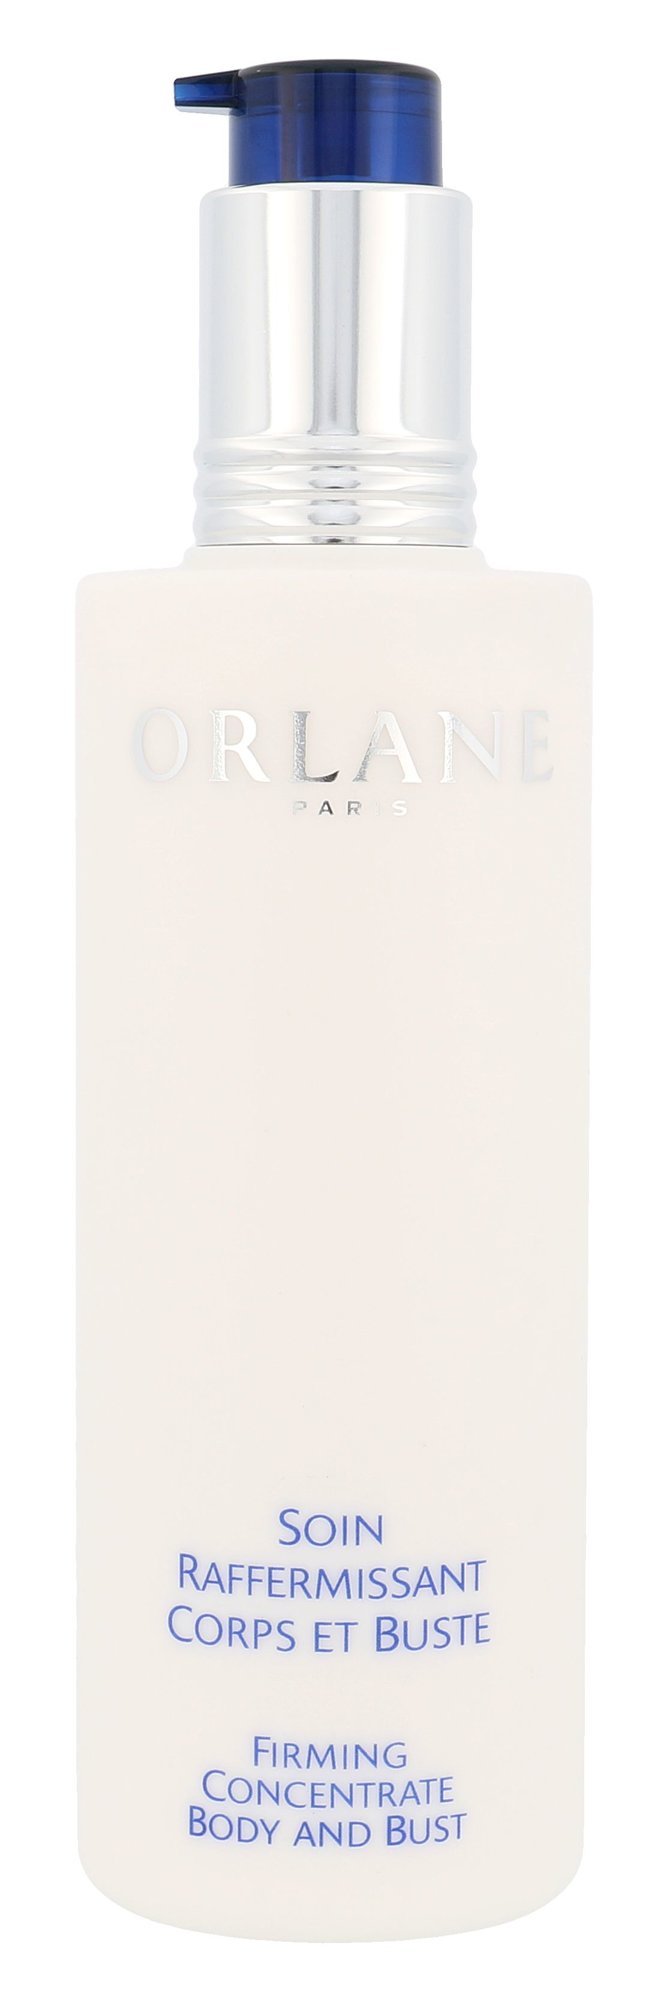 Orlane Body Firming Concentrate Body And Bust liekninamasis kremas